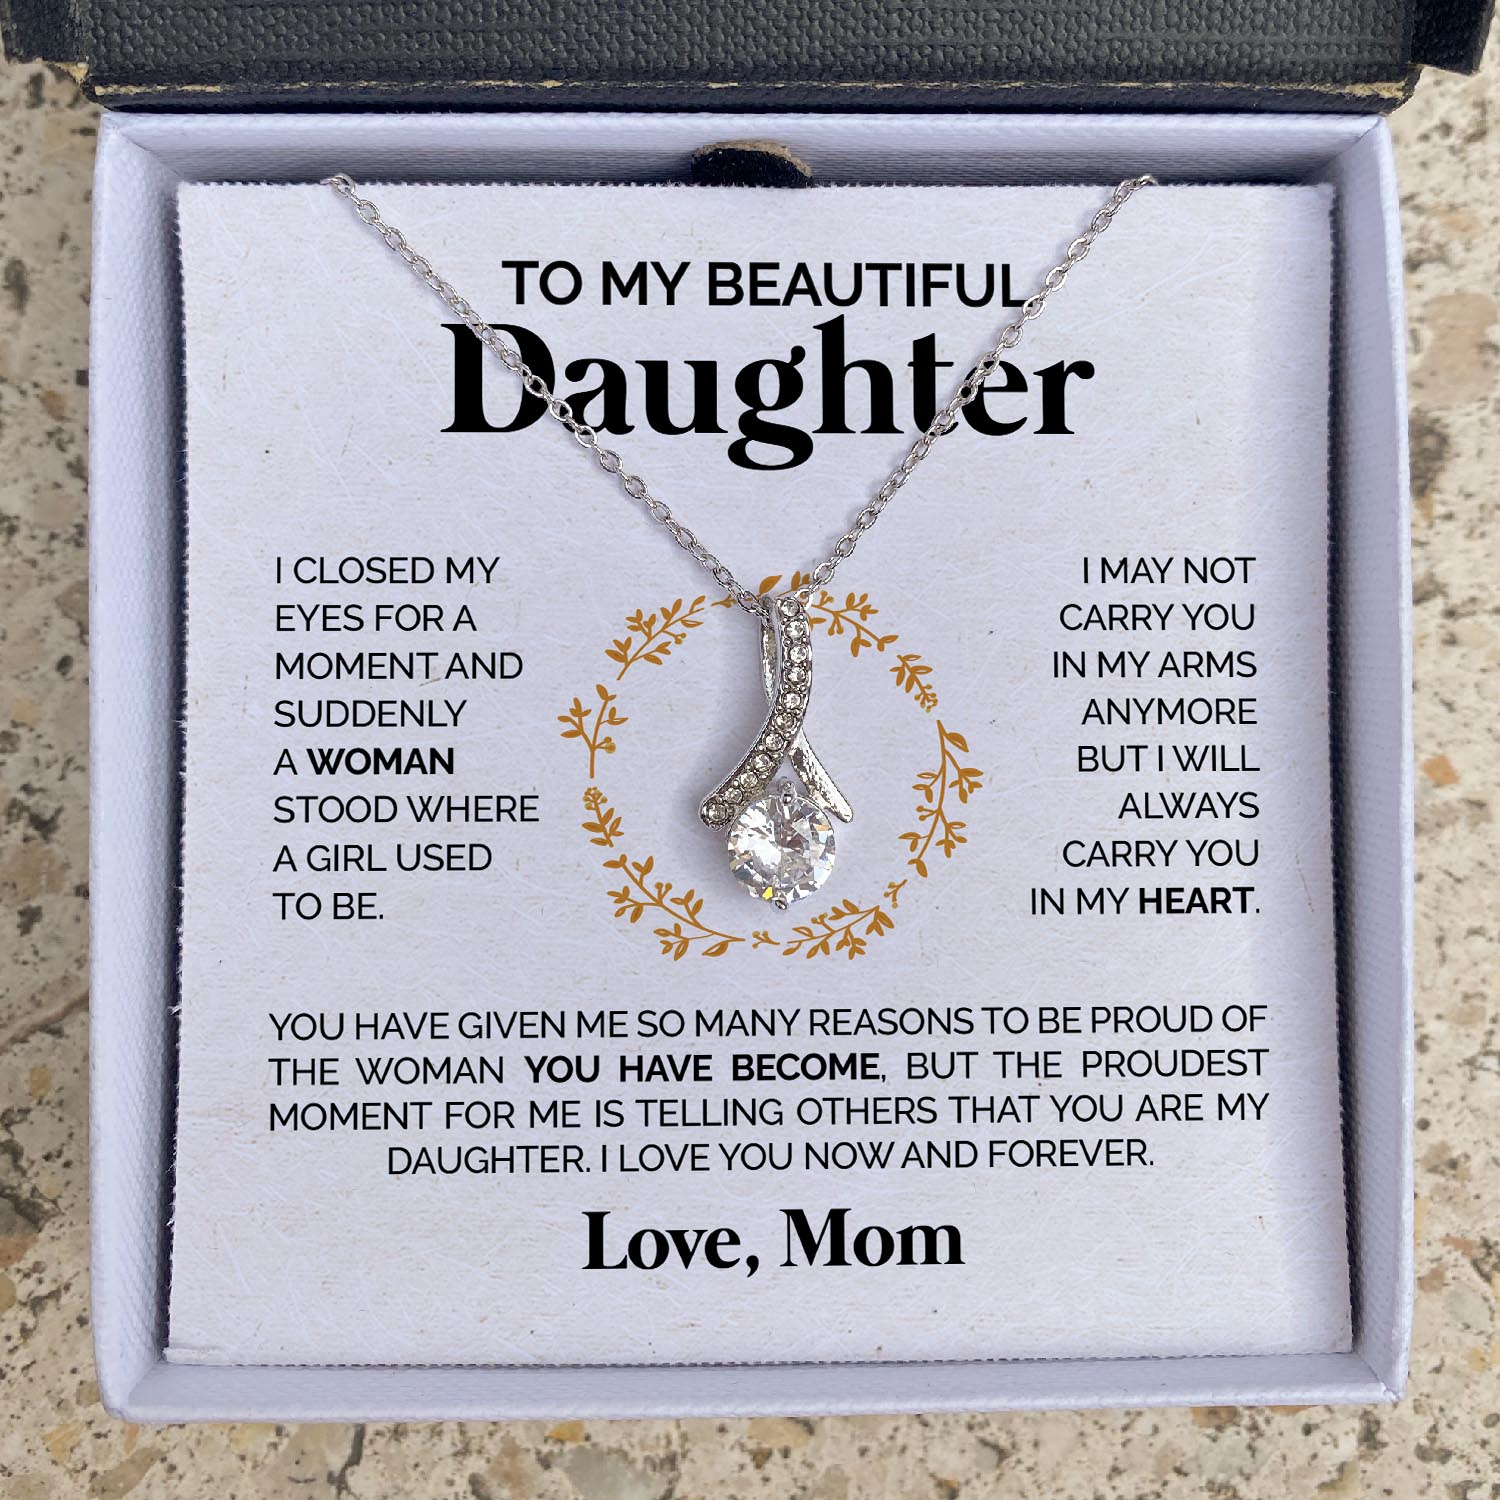 ShineOn Fulfillment Jewelry 14K White Gold Finish / Standard Box To my Beautiful Daughter - I love you - Ribbon Necklace